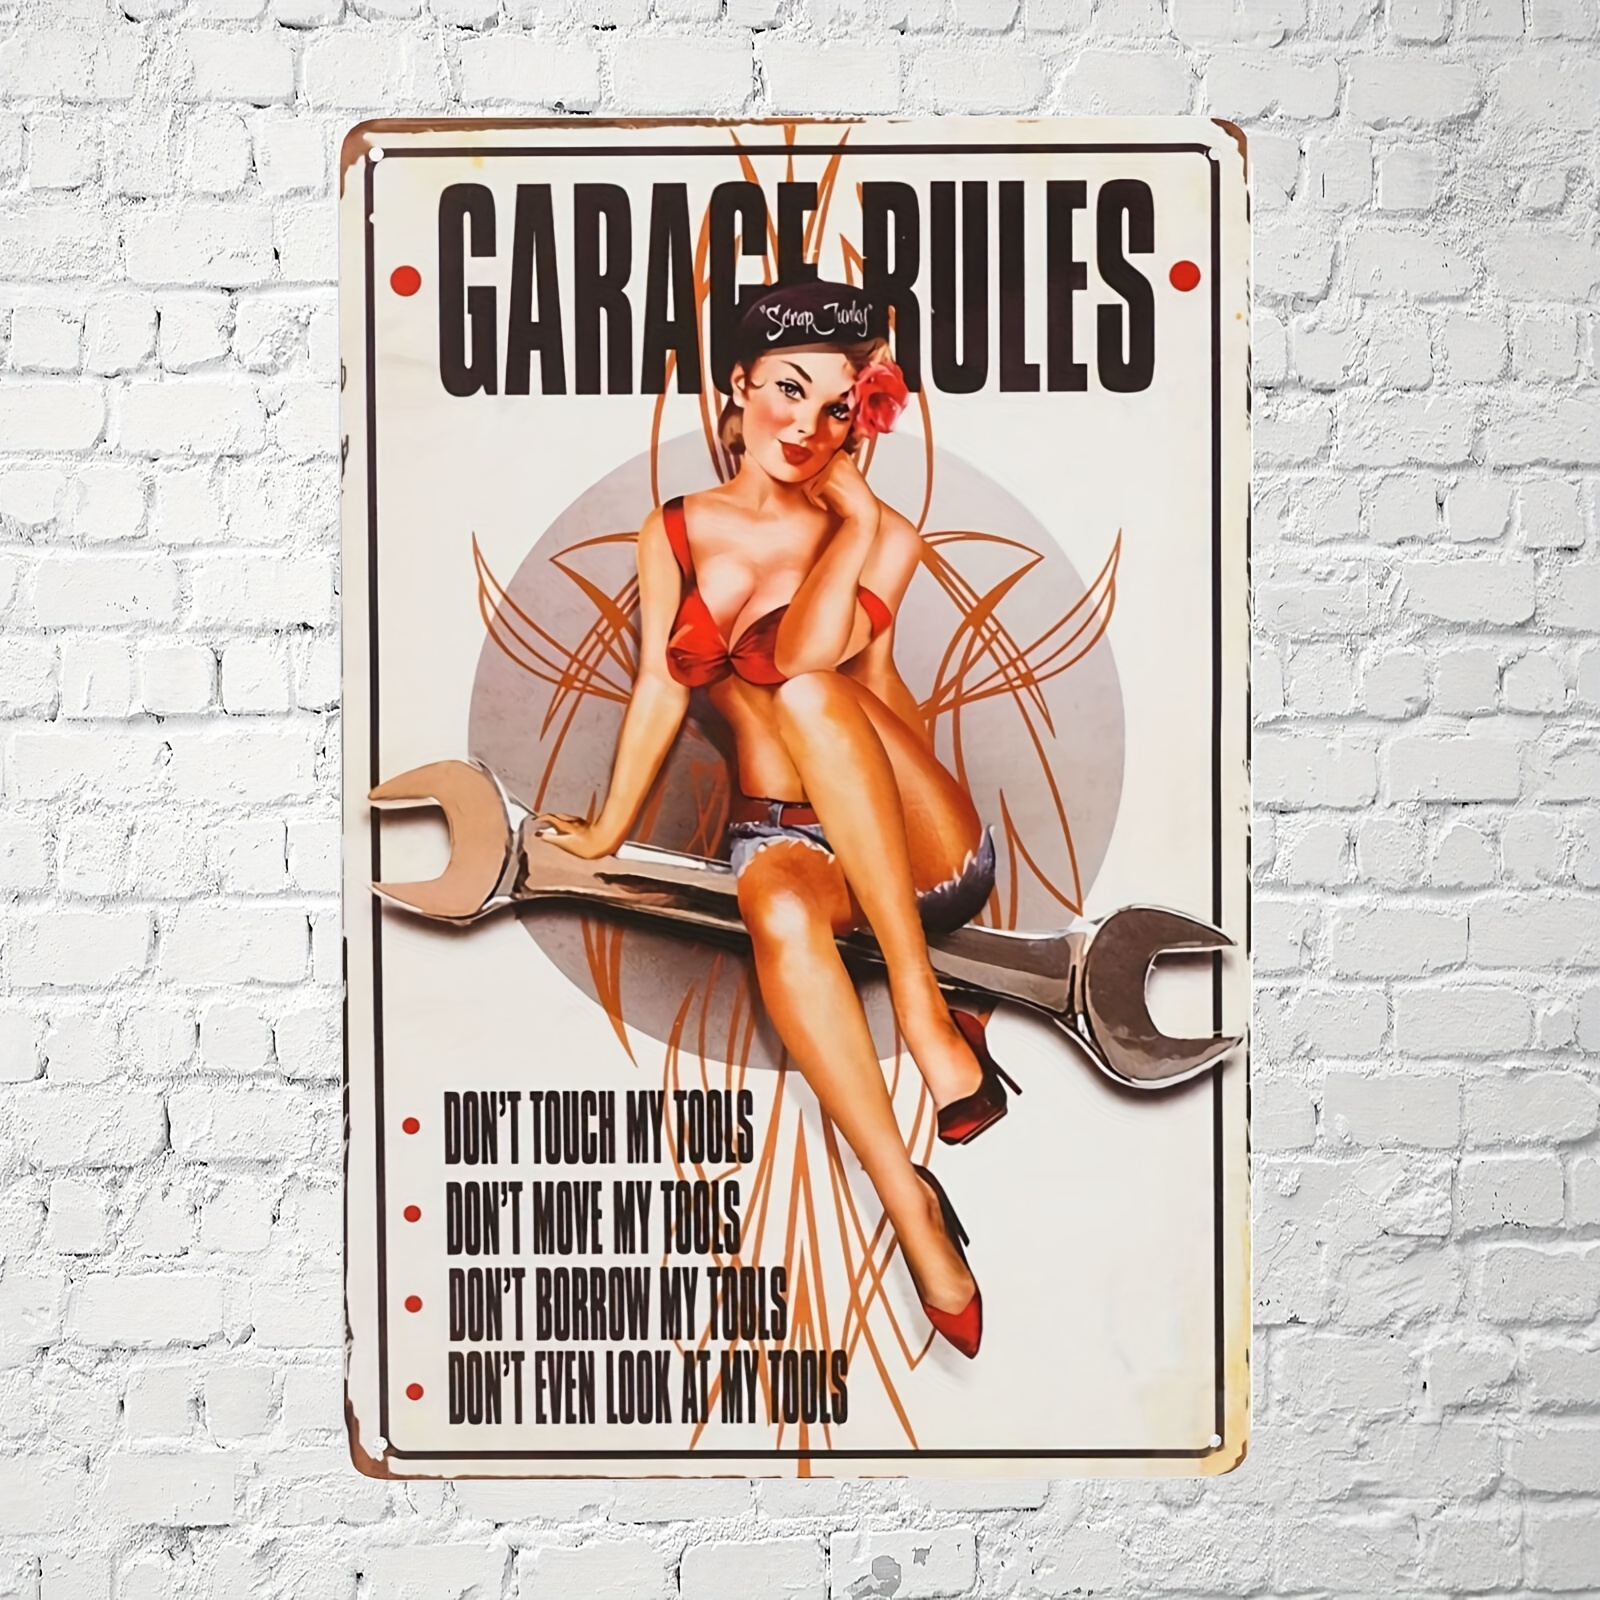 Plaque métal Garage pin up - Plaques/Pin-up / Rte 66 - Donut and pin-up